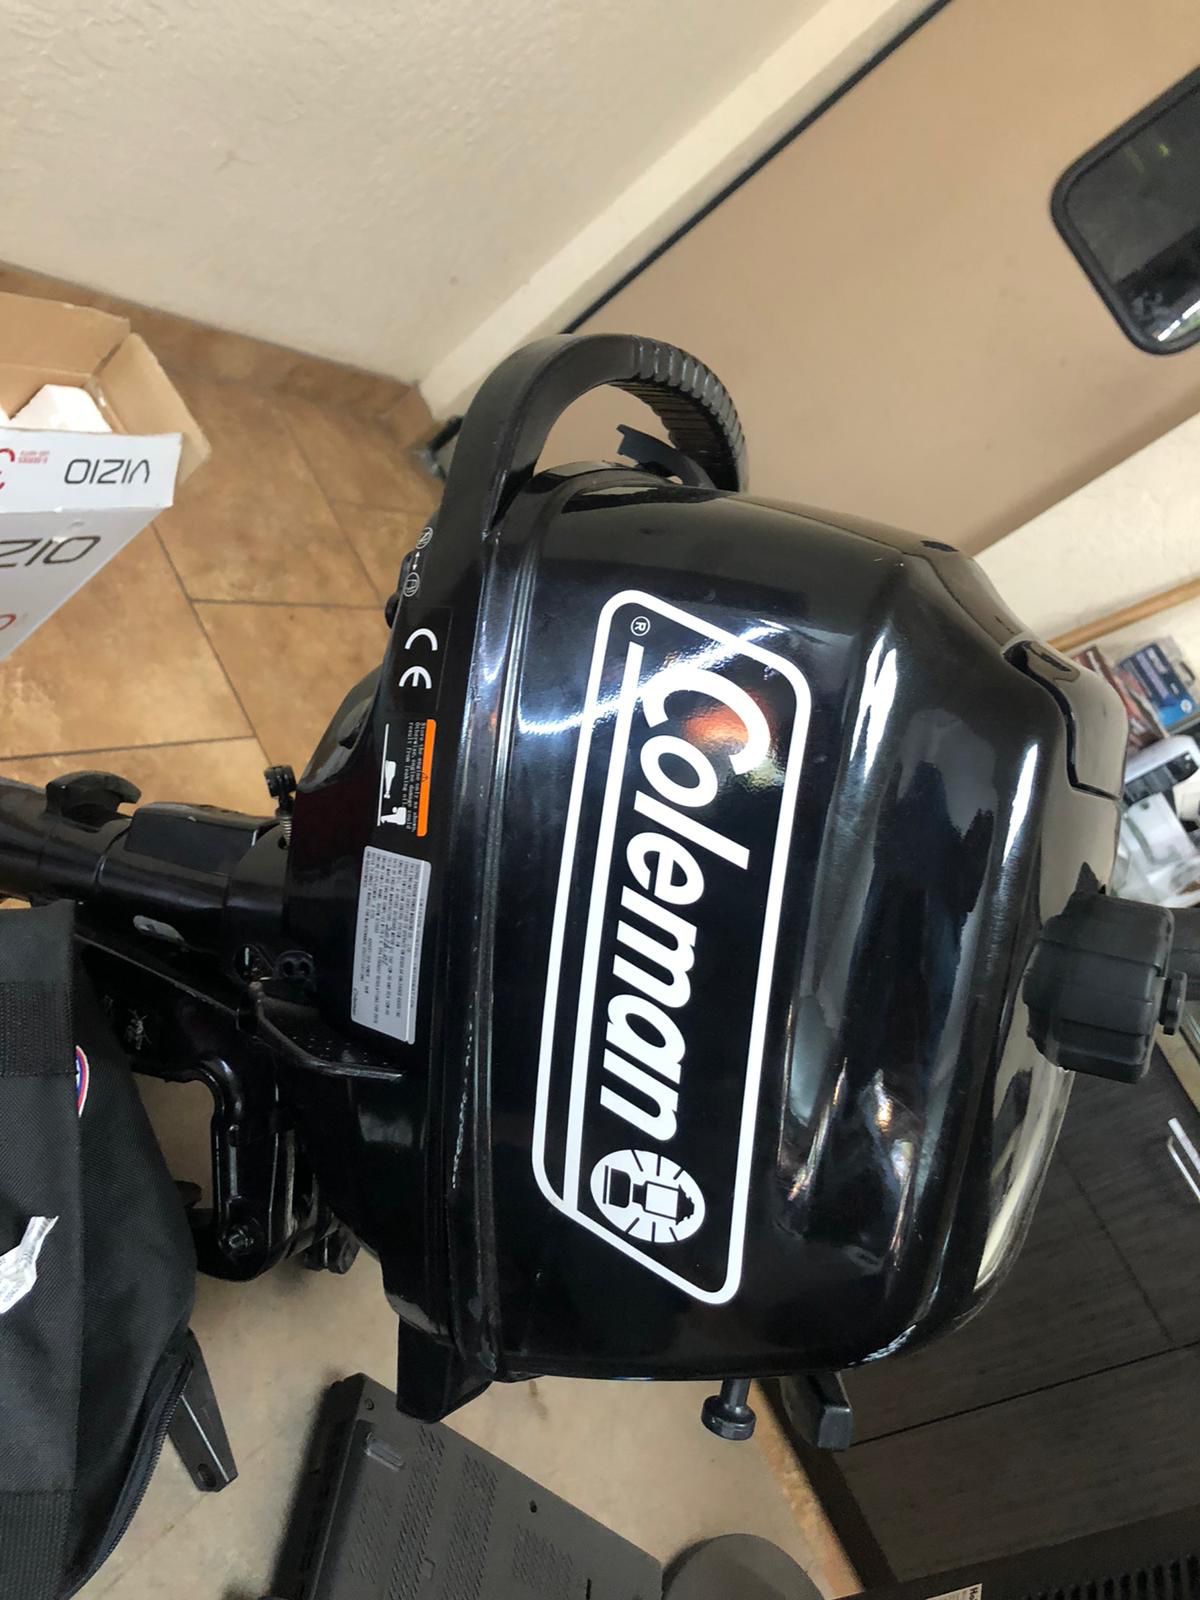 Coleman Outboard Motor - AS IS